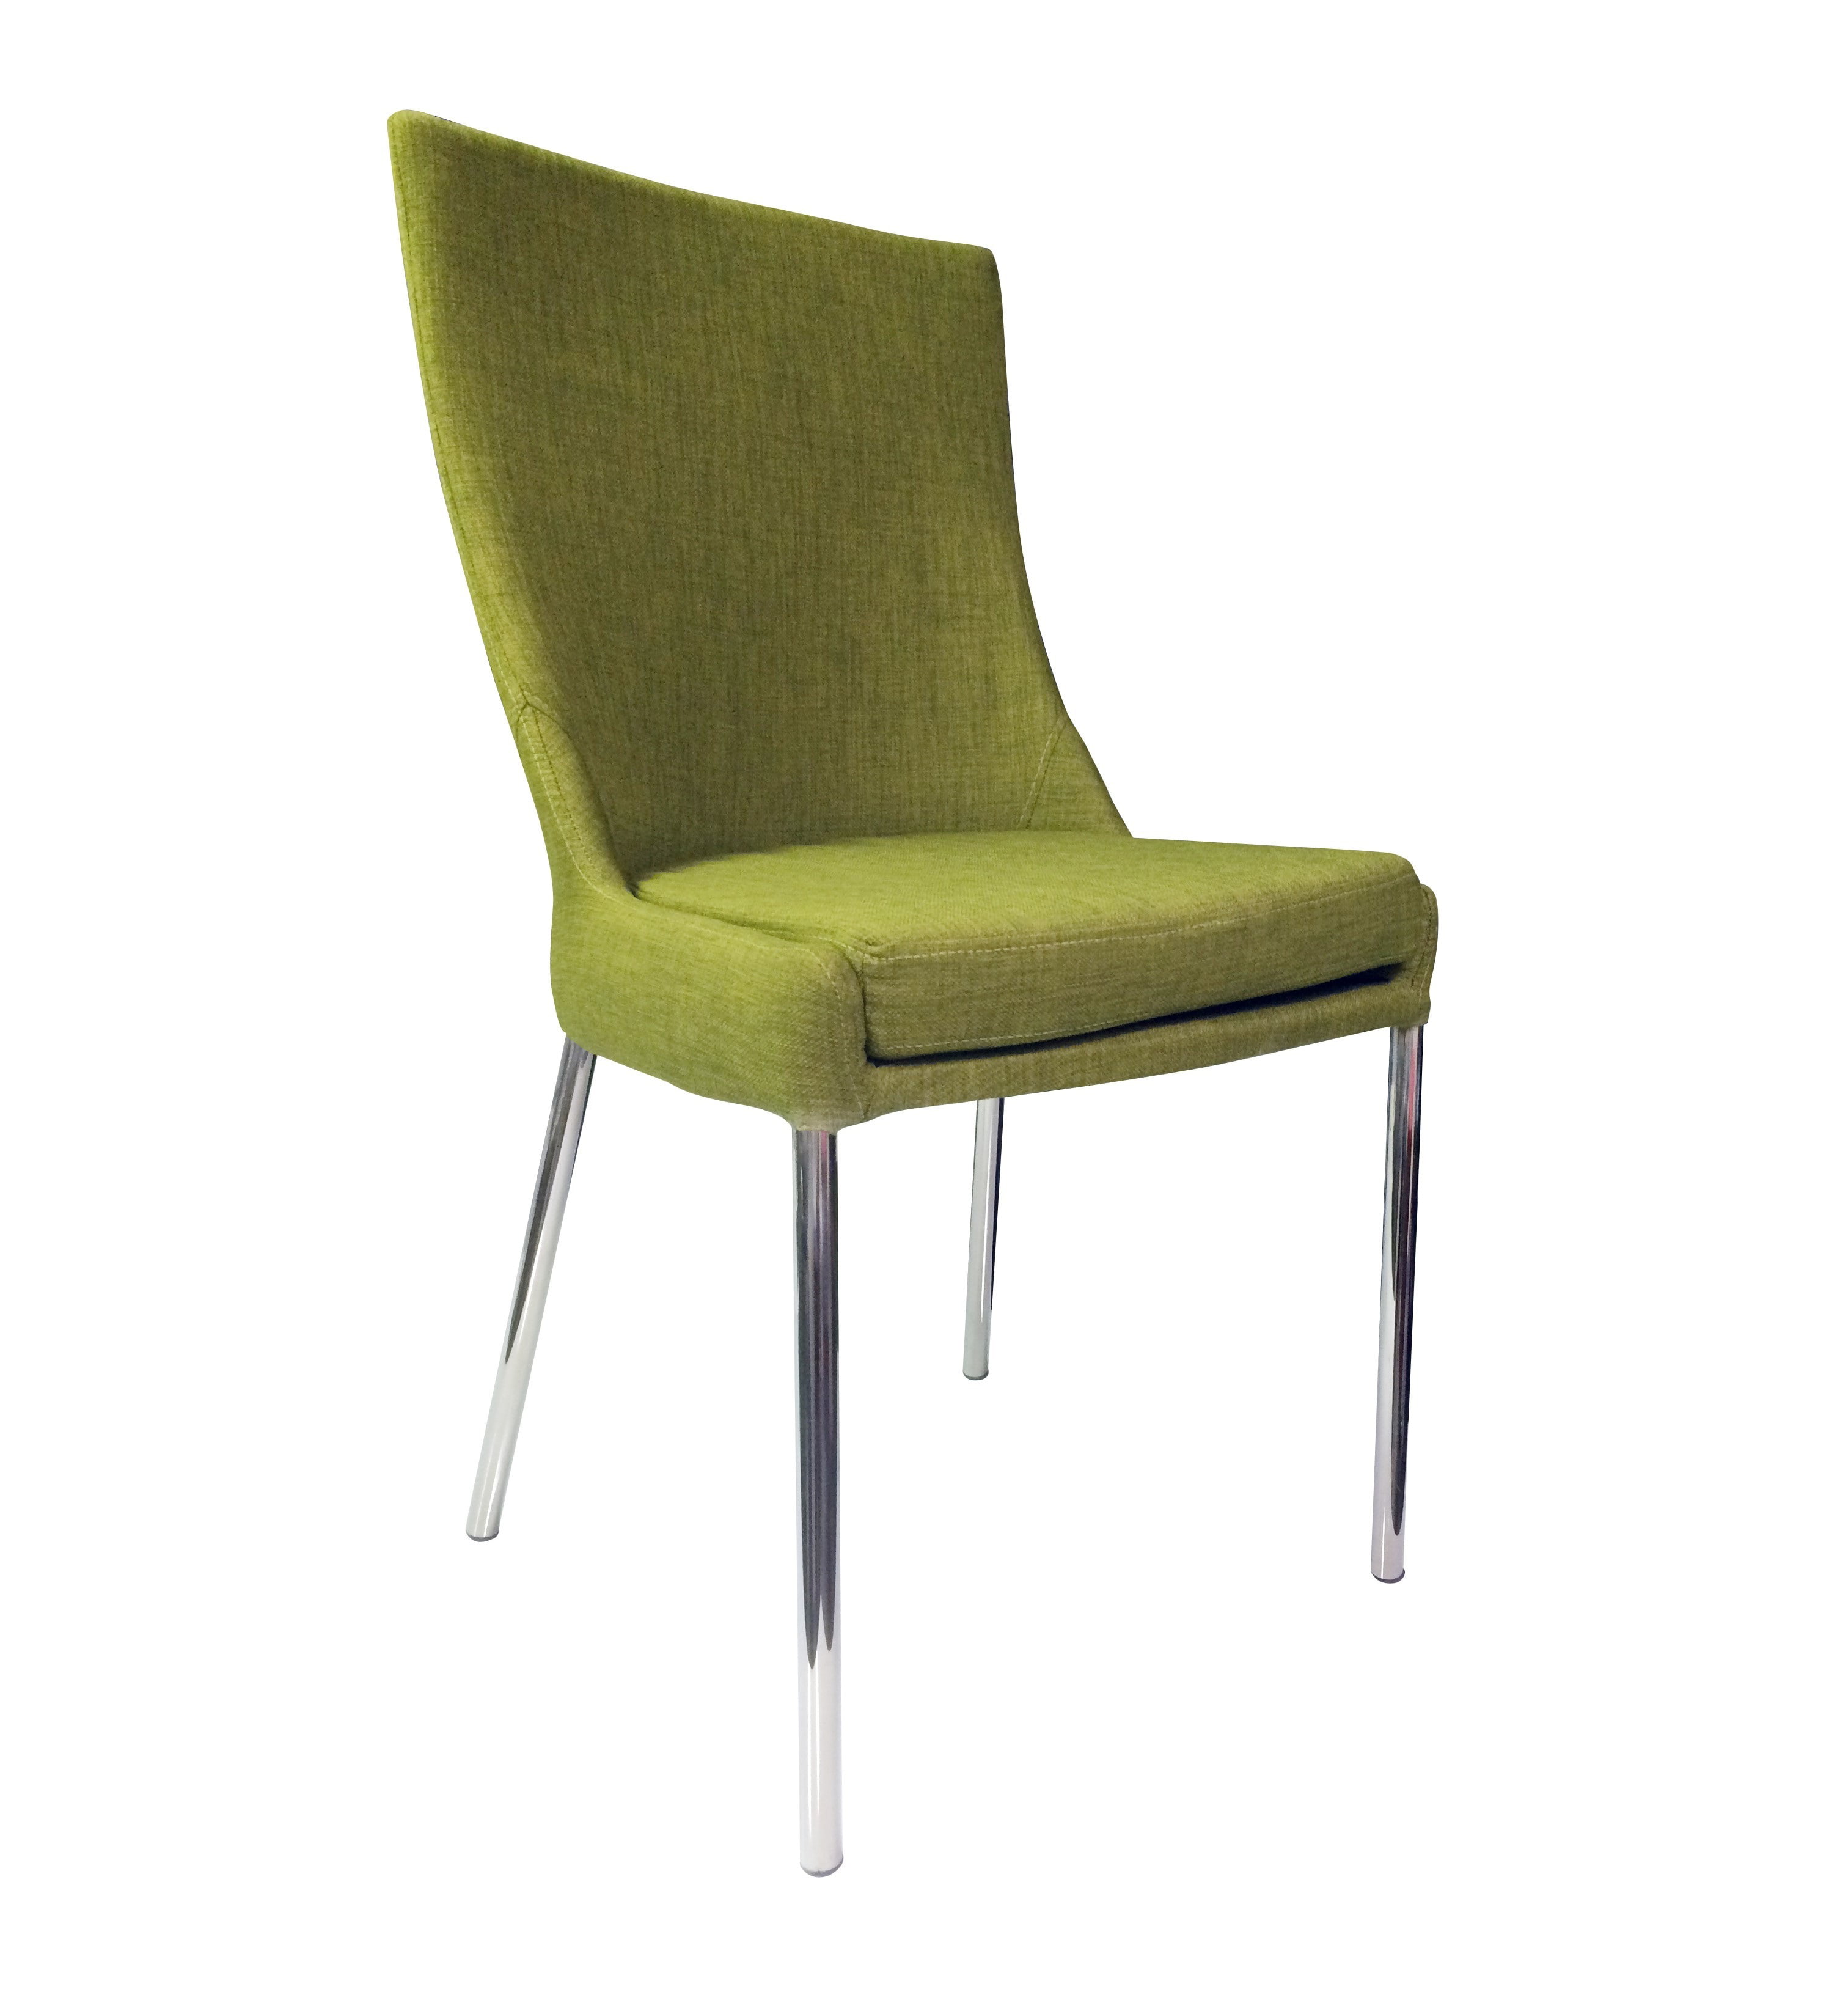 Side dining chair fabric in olive green color Walmart